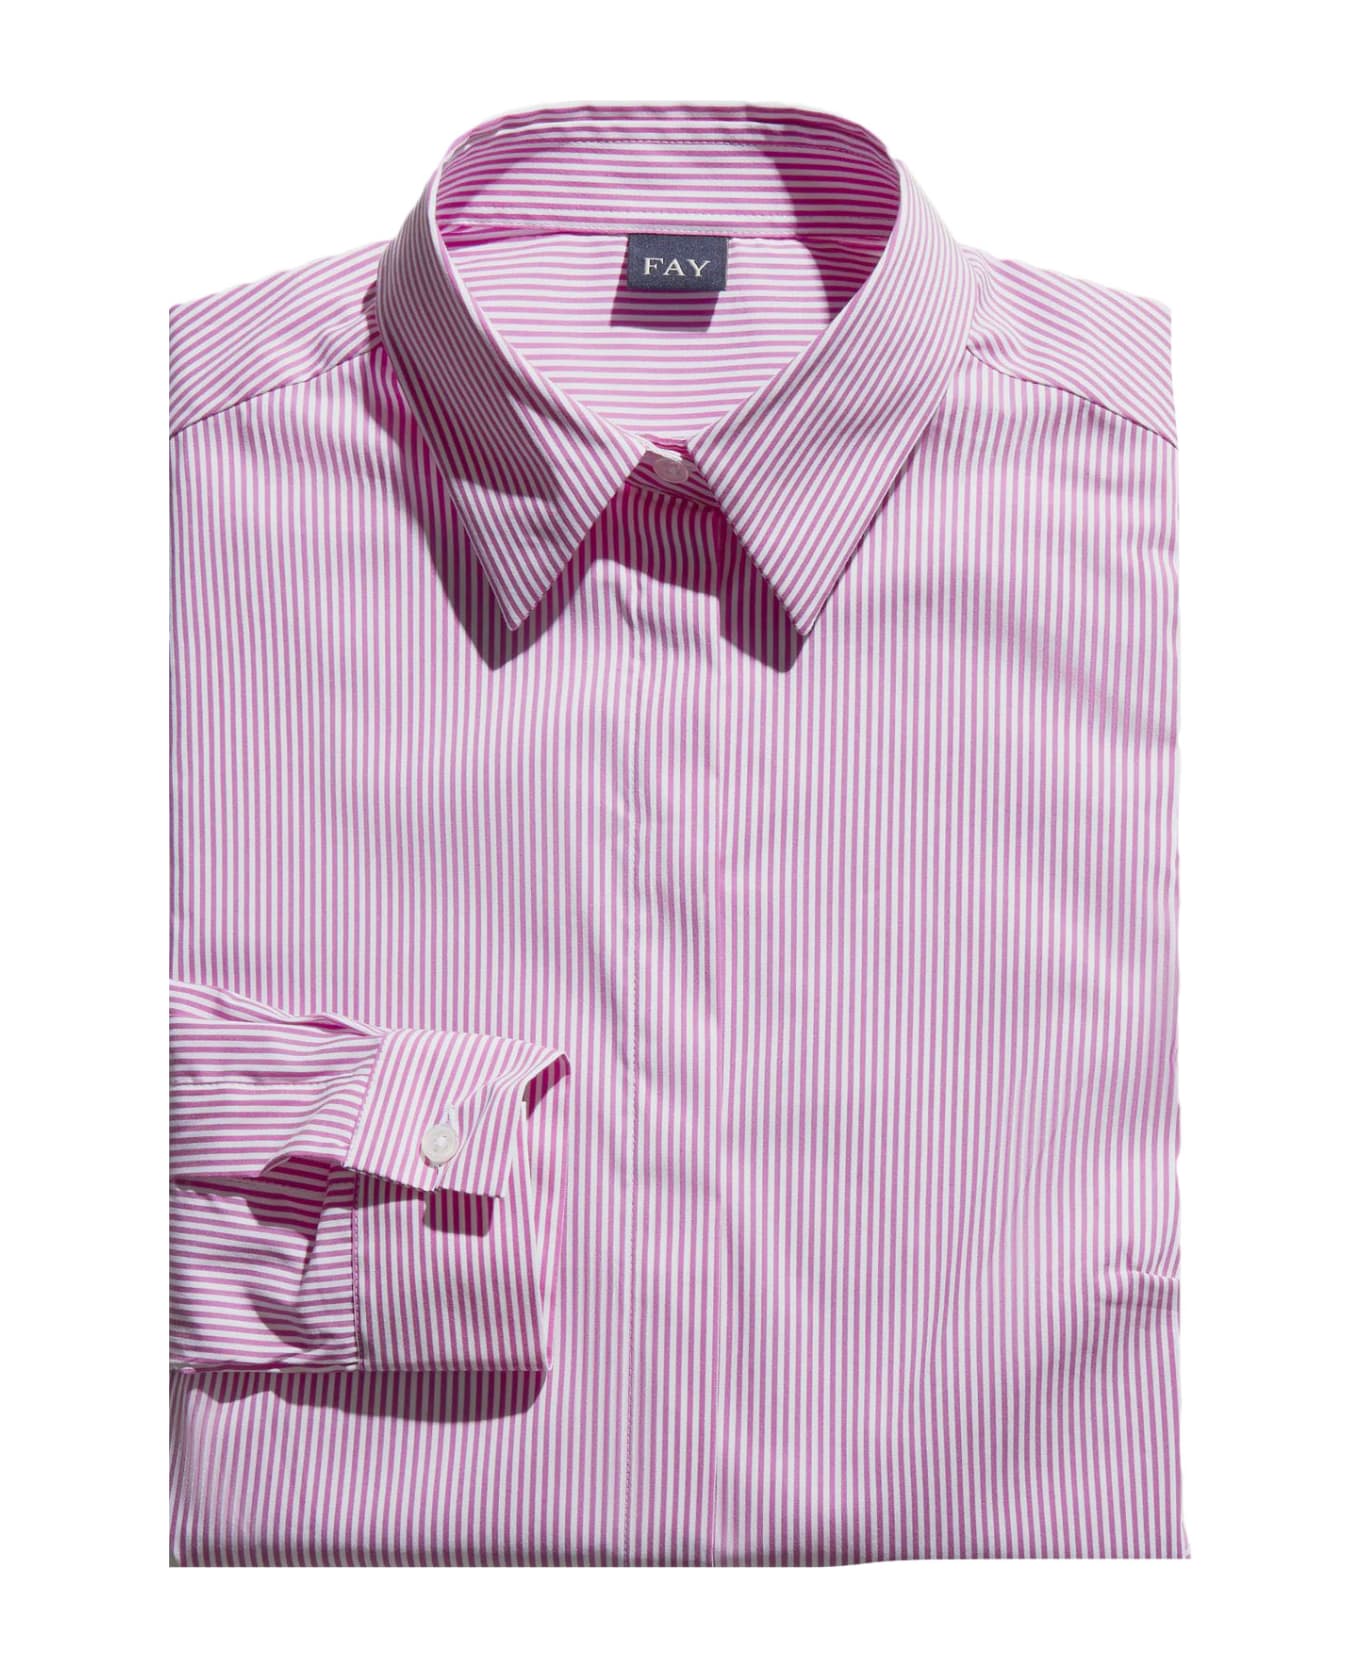 Fay White And Pink Stretch Cotton Shirt - Pink